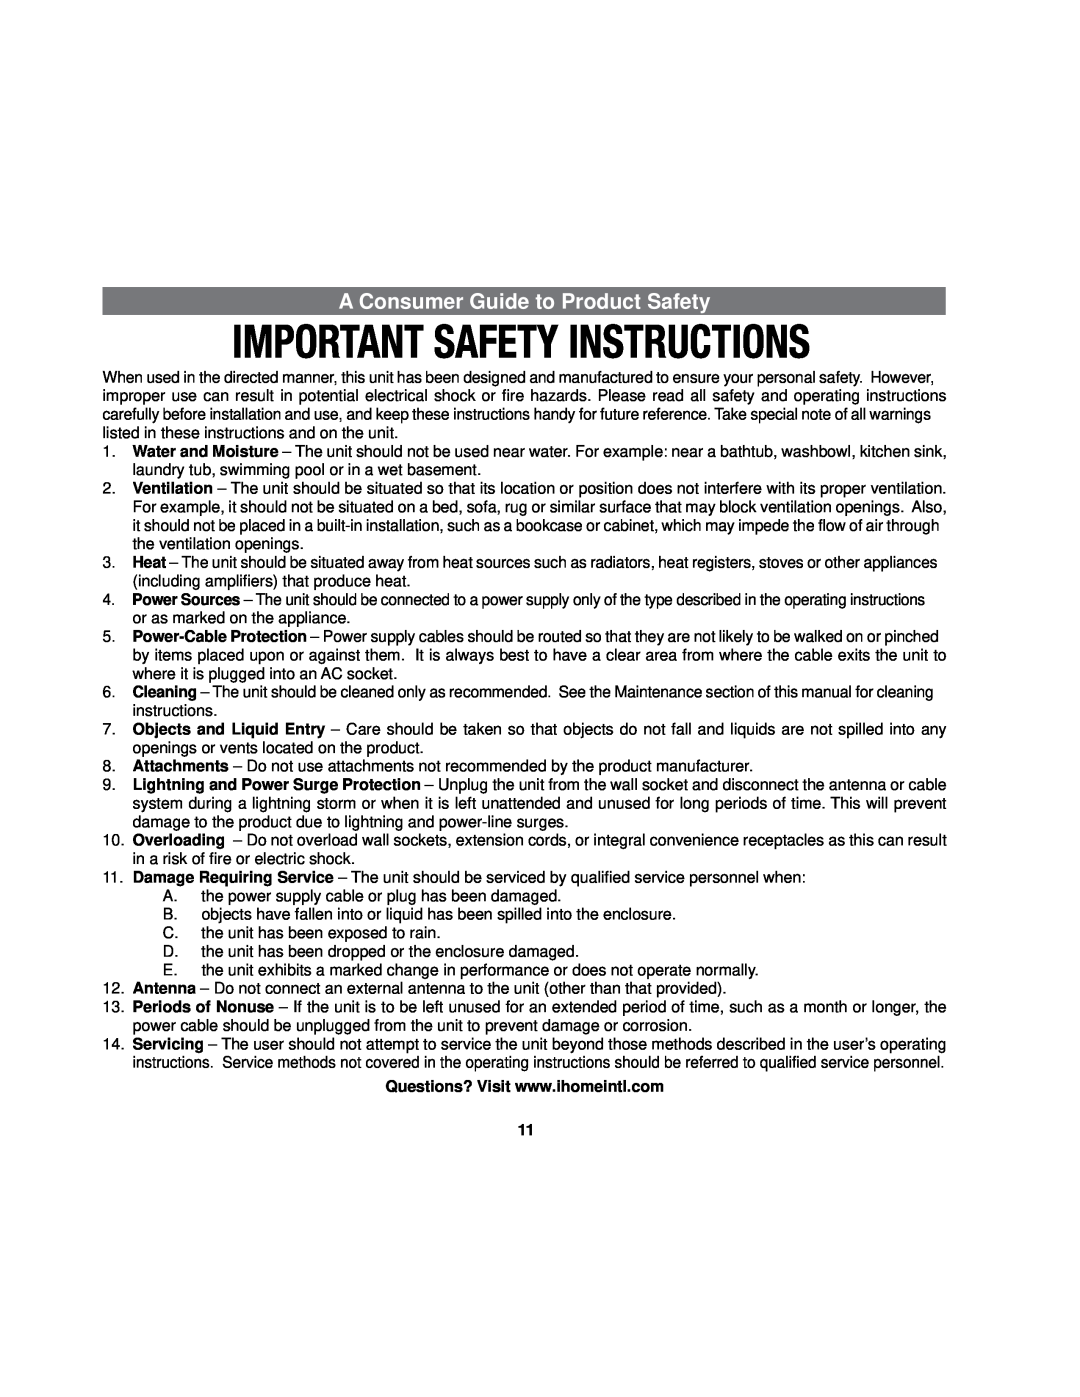 iHome iA100 manual A Consumer Guide to Product Safety 